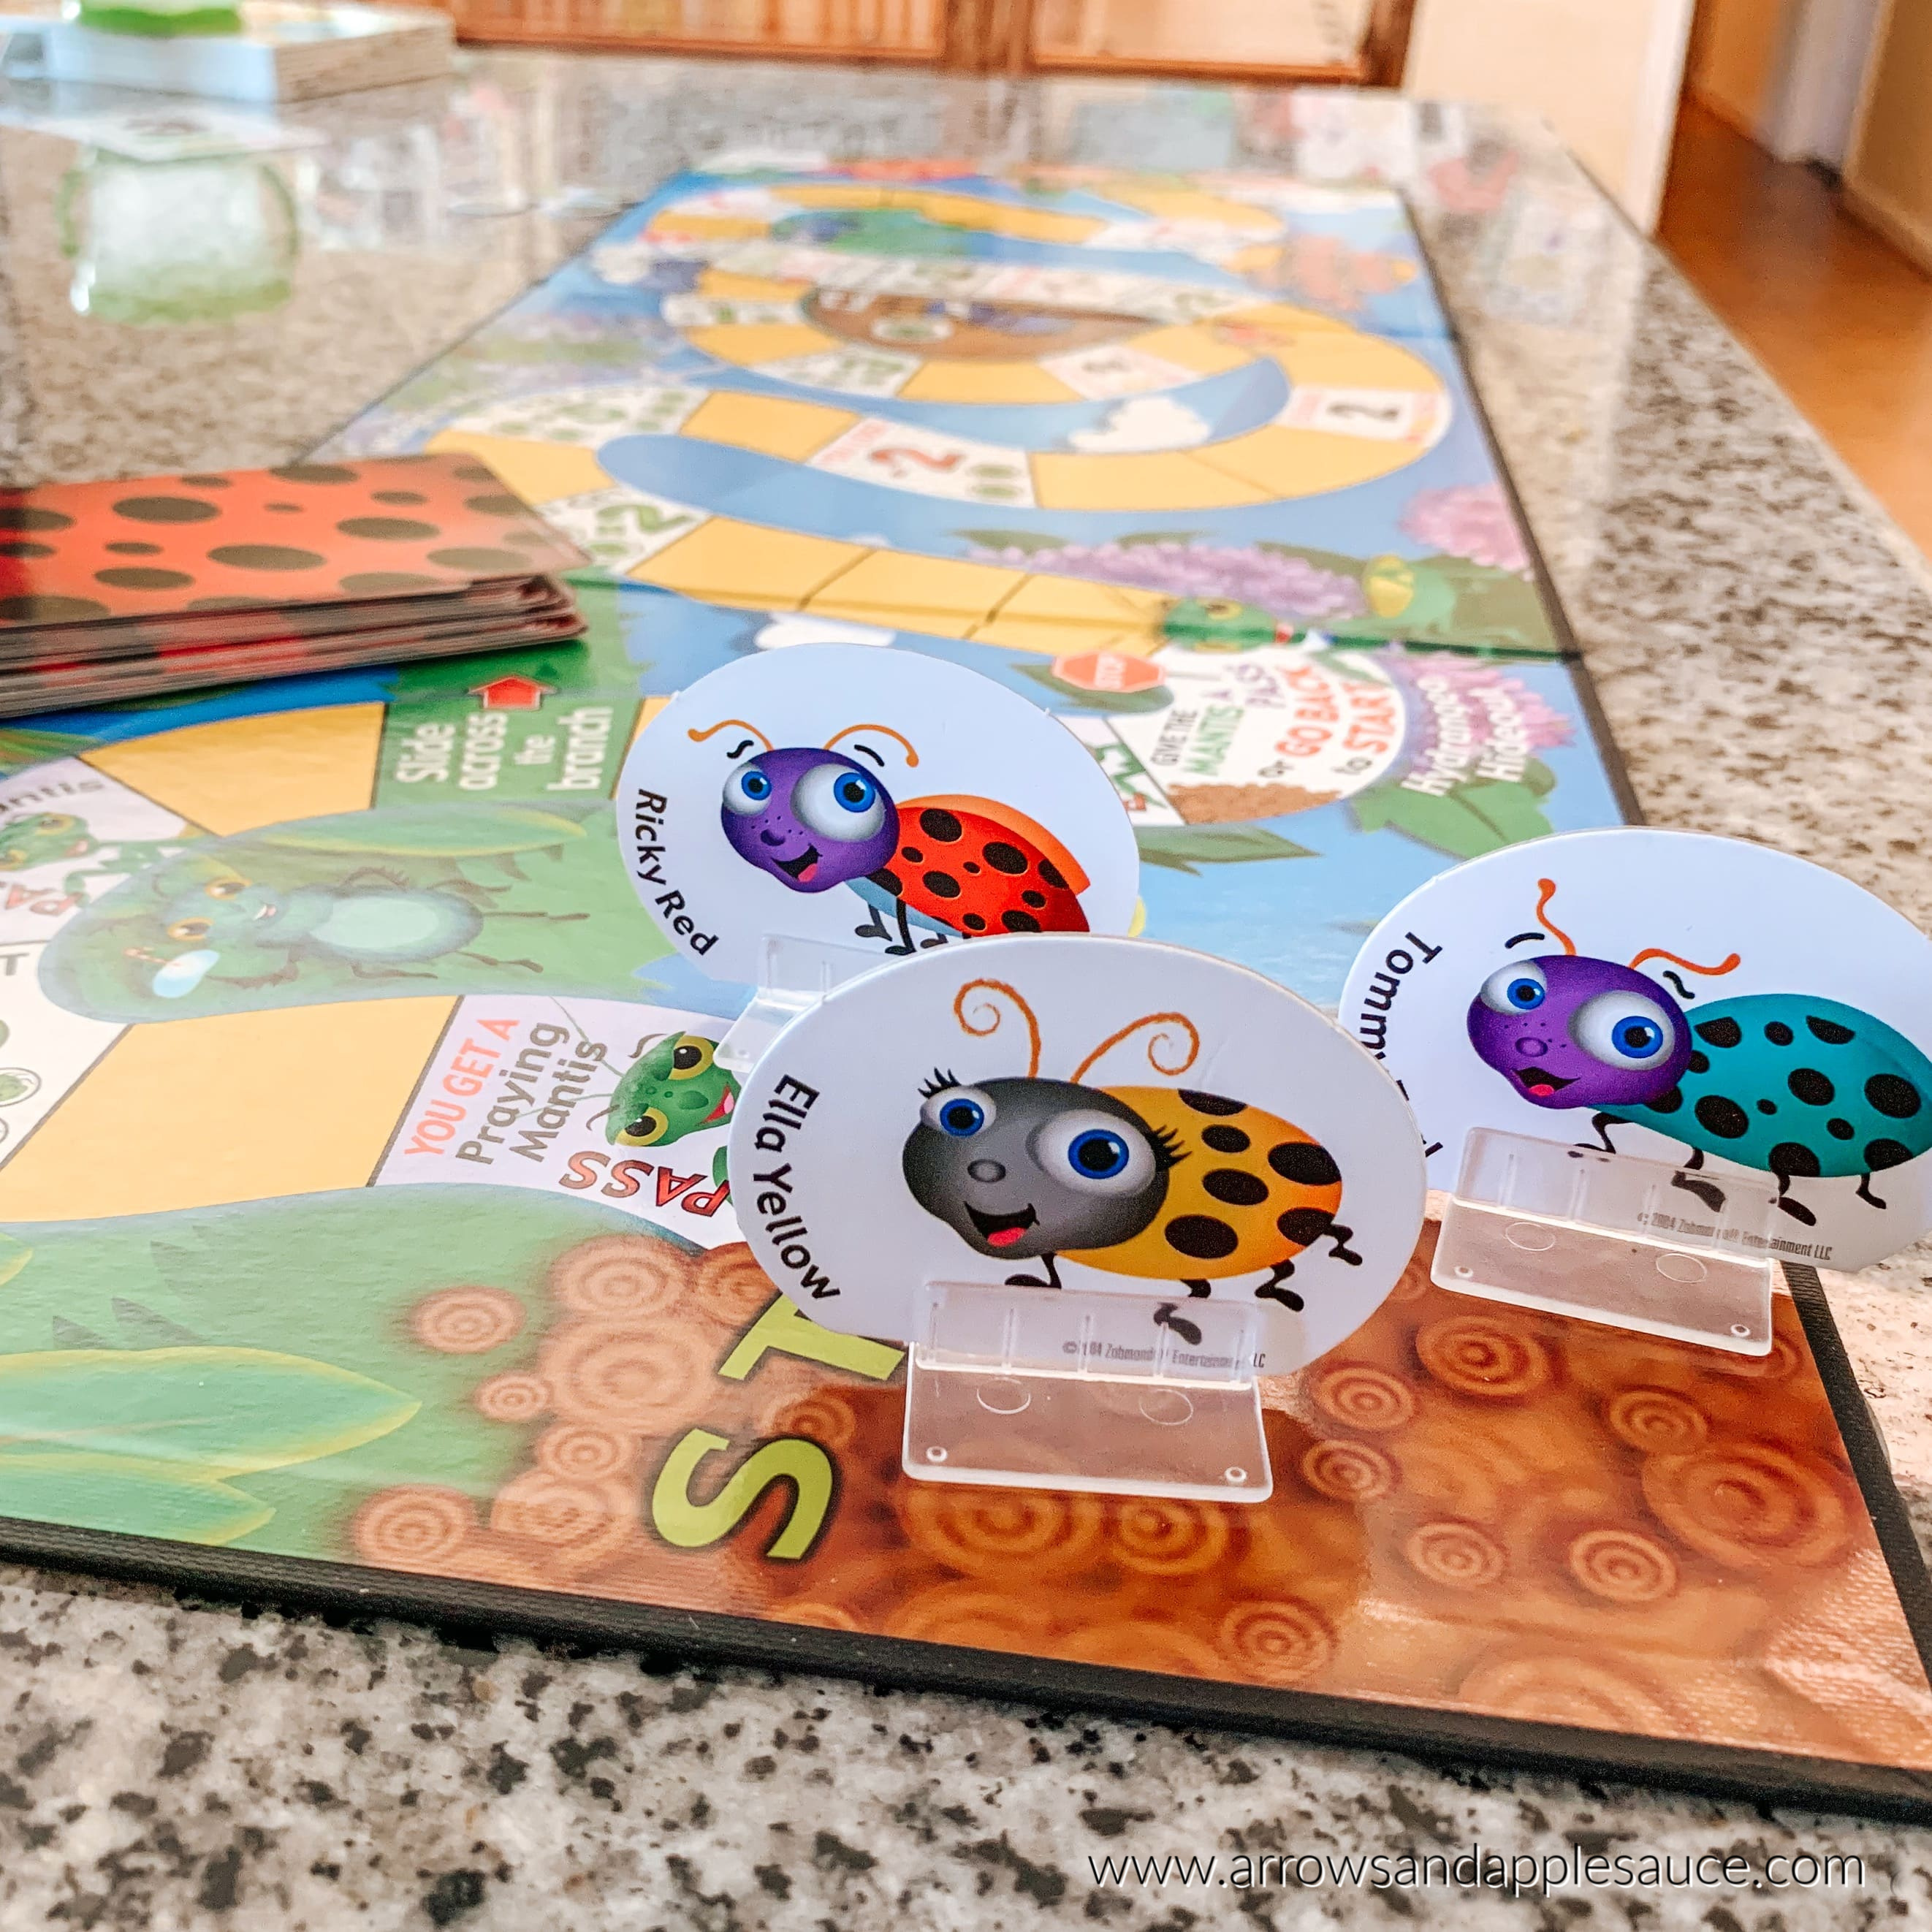 Math is our favorite subject so playing early math games will be a fun way to stay sharp this summer. Check out our favorite game schooling math games here! #gameschooling #preschoolmath #beginnermath #preschoolathome #mathboardgames #familygamenight #playbasedlearning #educationalgames